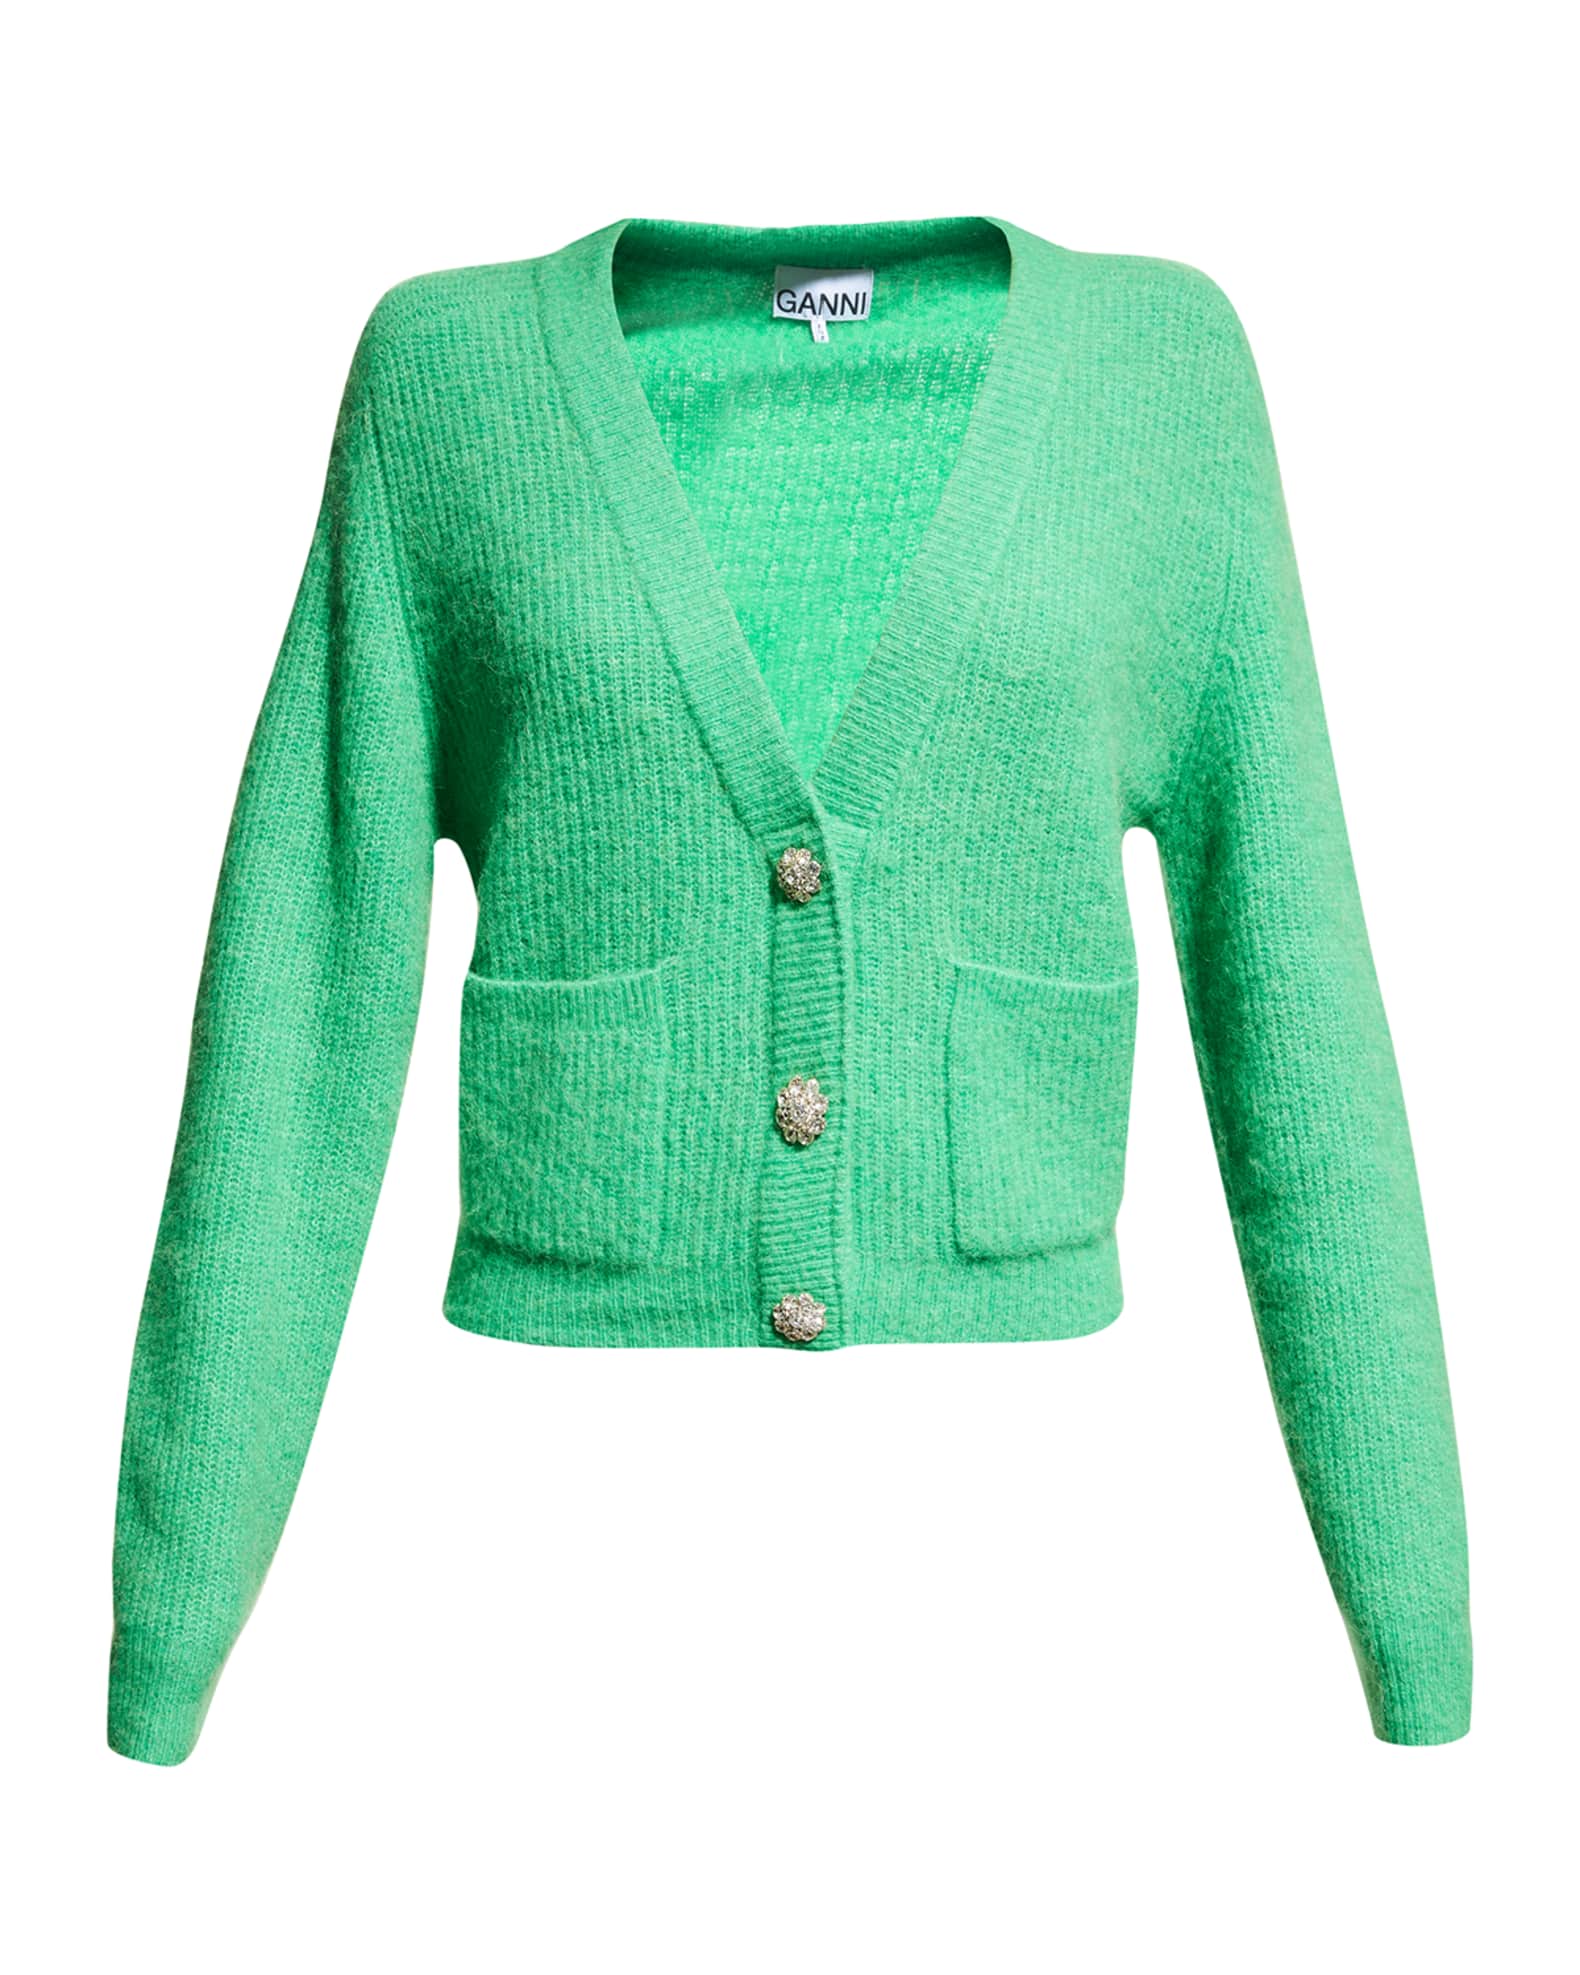 Ganni Wool Crystal Button-Front Sweater | Neiman Marcus